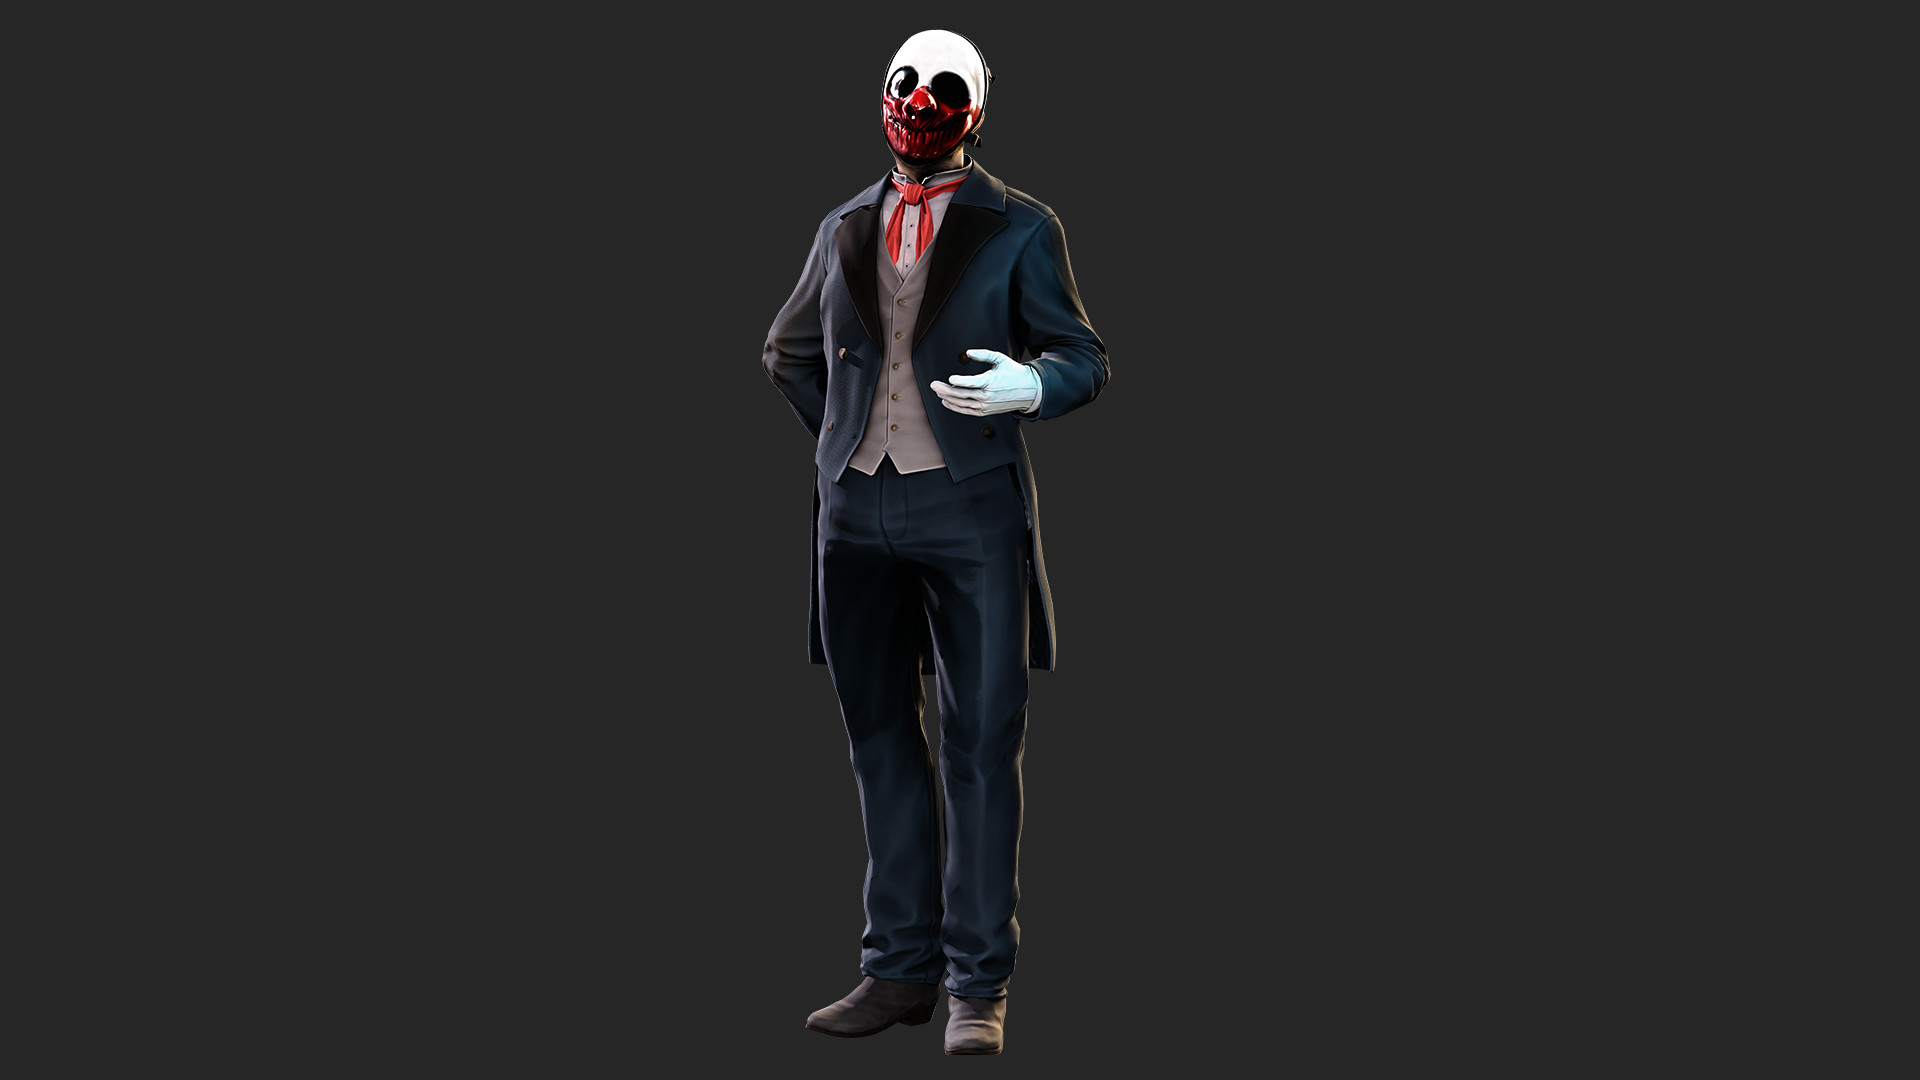 P3d hack for payday 2 фото 51